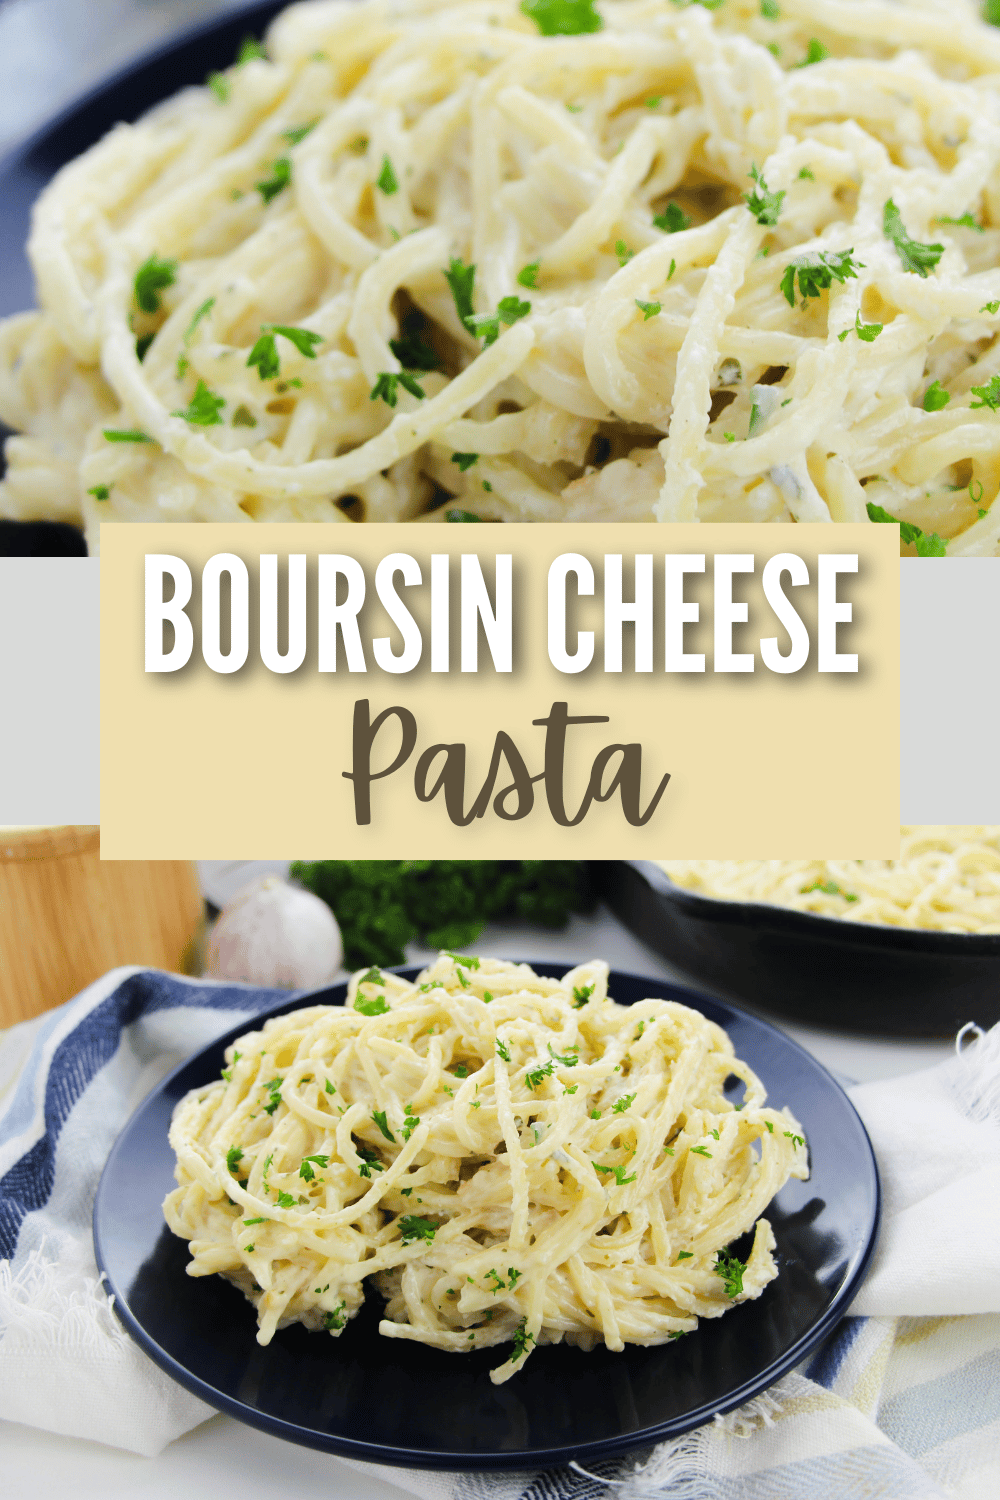 This Boursin Cheese Pasta is easy to make and packed with flavor. It’s a creamy pasta dish that can be served as a main course or side dish. #boursincheesepasta #pasta #boursincheese #dinner #sidedish #pastadish via @wondermomwannab